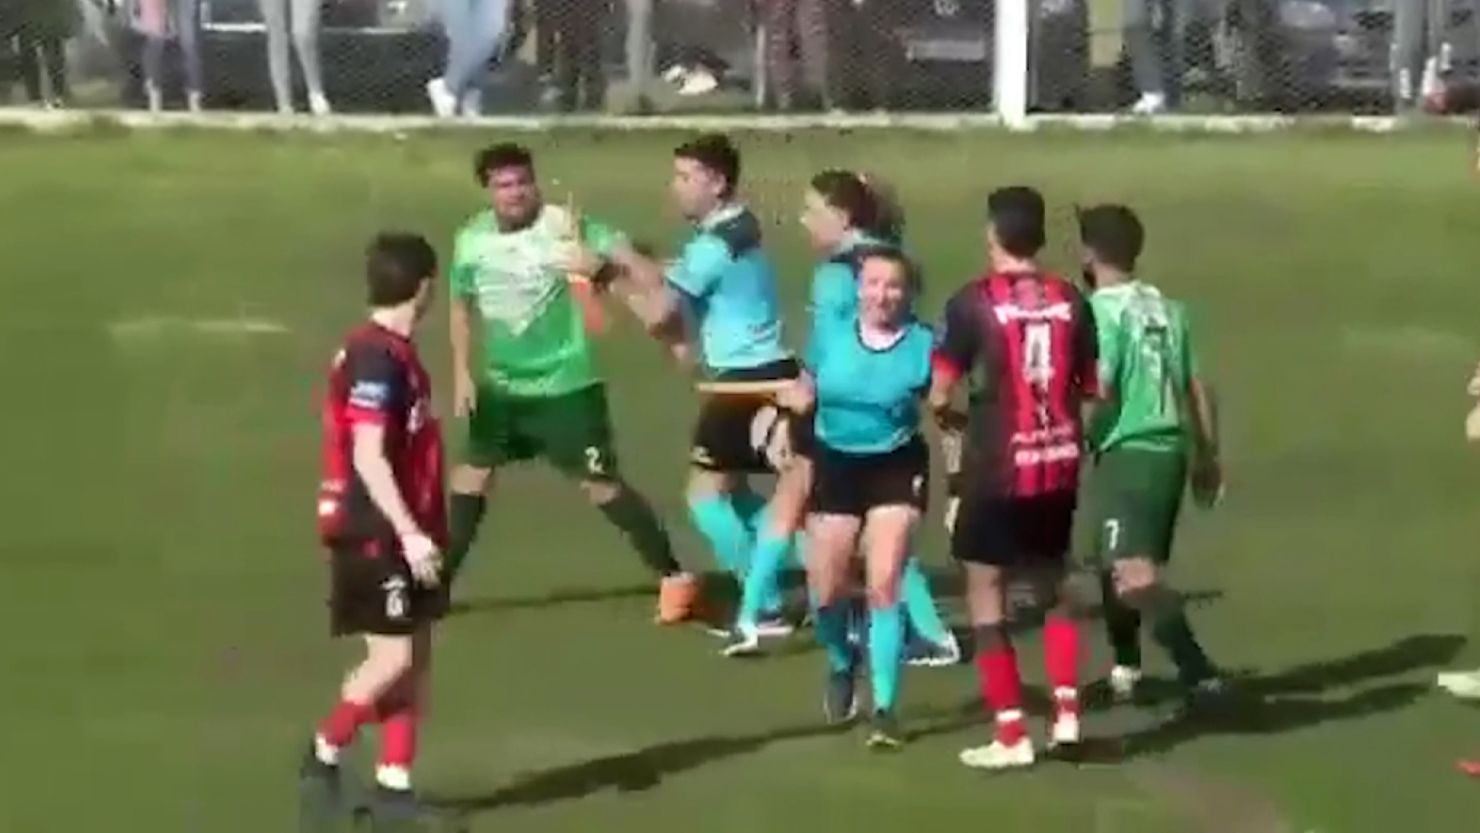 Cristian Tirone Argentine Footballer Arrested After Punching Female Referee During Match Cnn